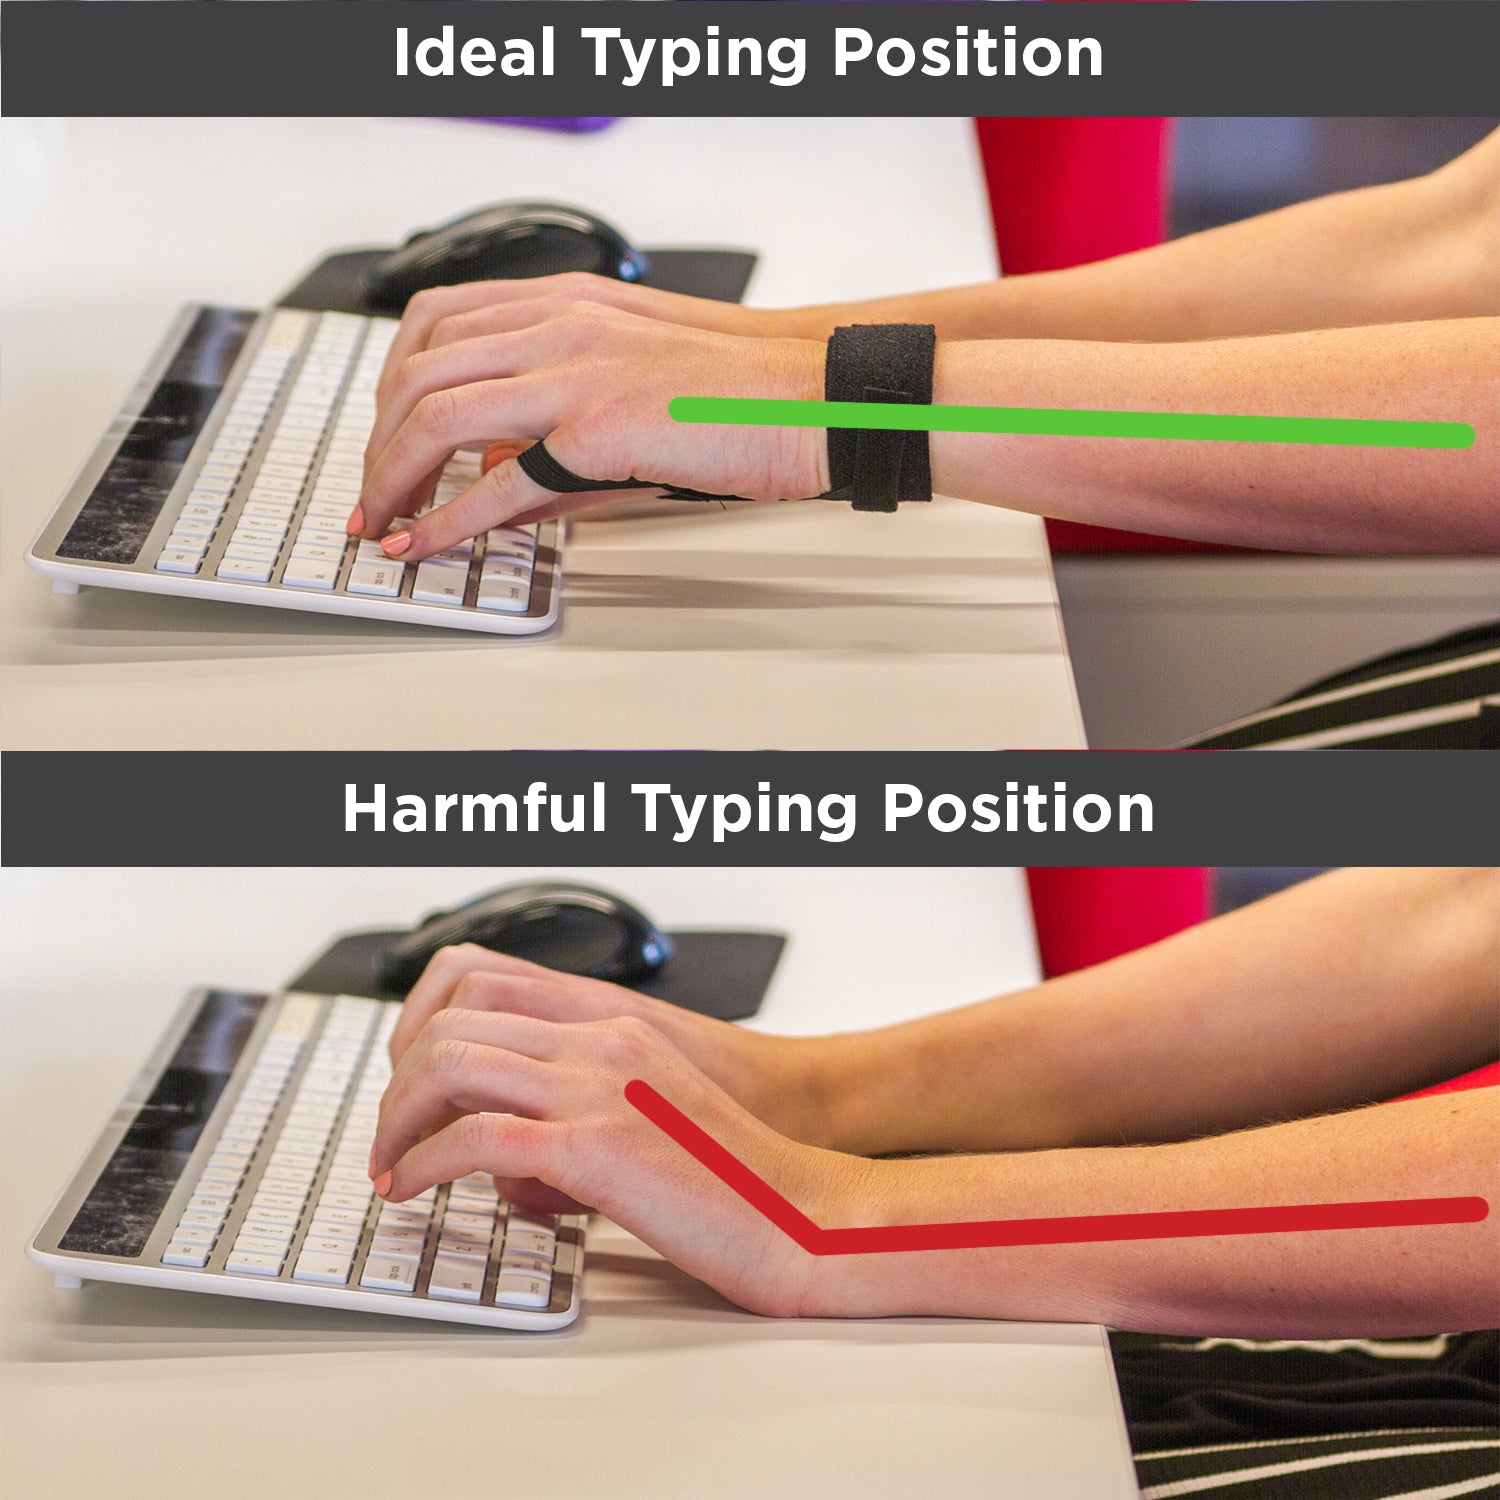 how your wrist should sit while working at a computer to prevent carpal tunnel